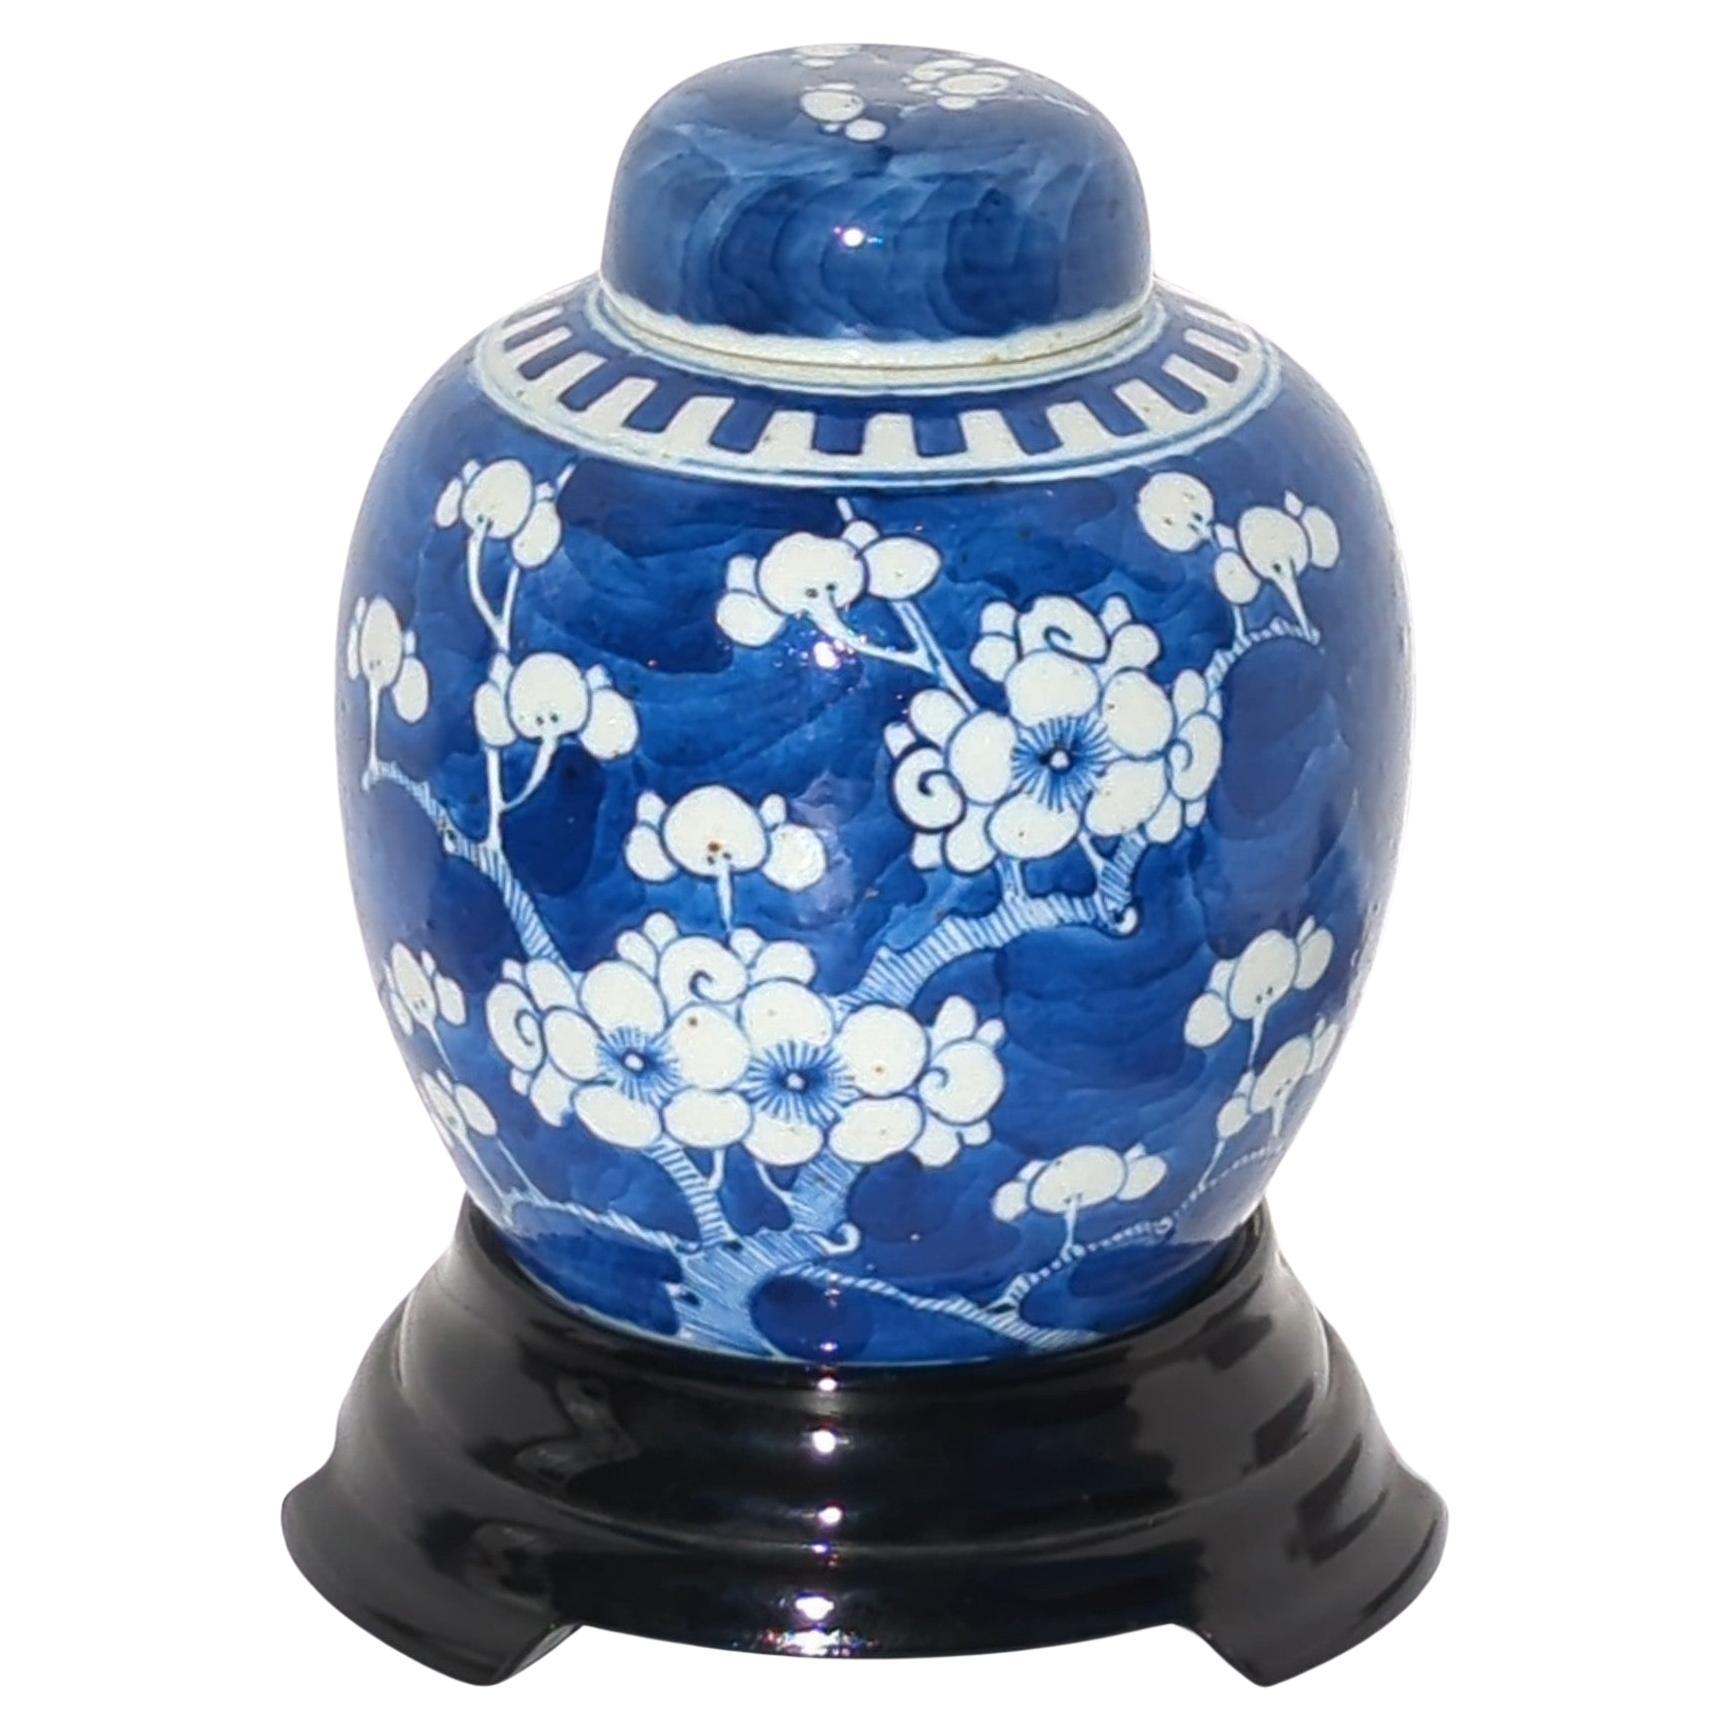 Antique early 20c Chinese export blue and white covered ginger jar, hand painted in reserve with branches of plum blossoms all over, on cobalt blue ground, with a double circle mark within the white glazed footing and a matching domed and blue and